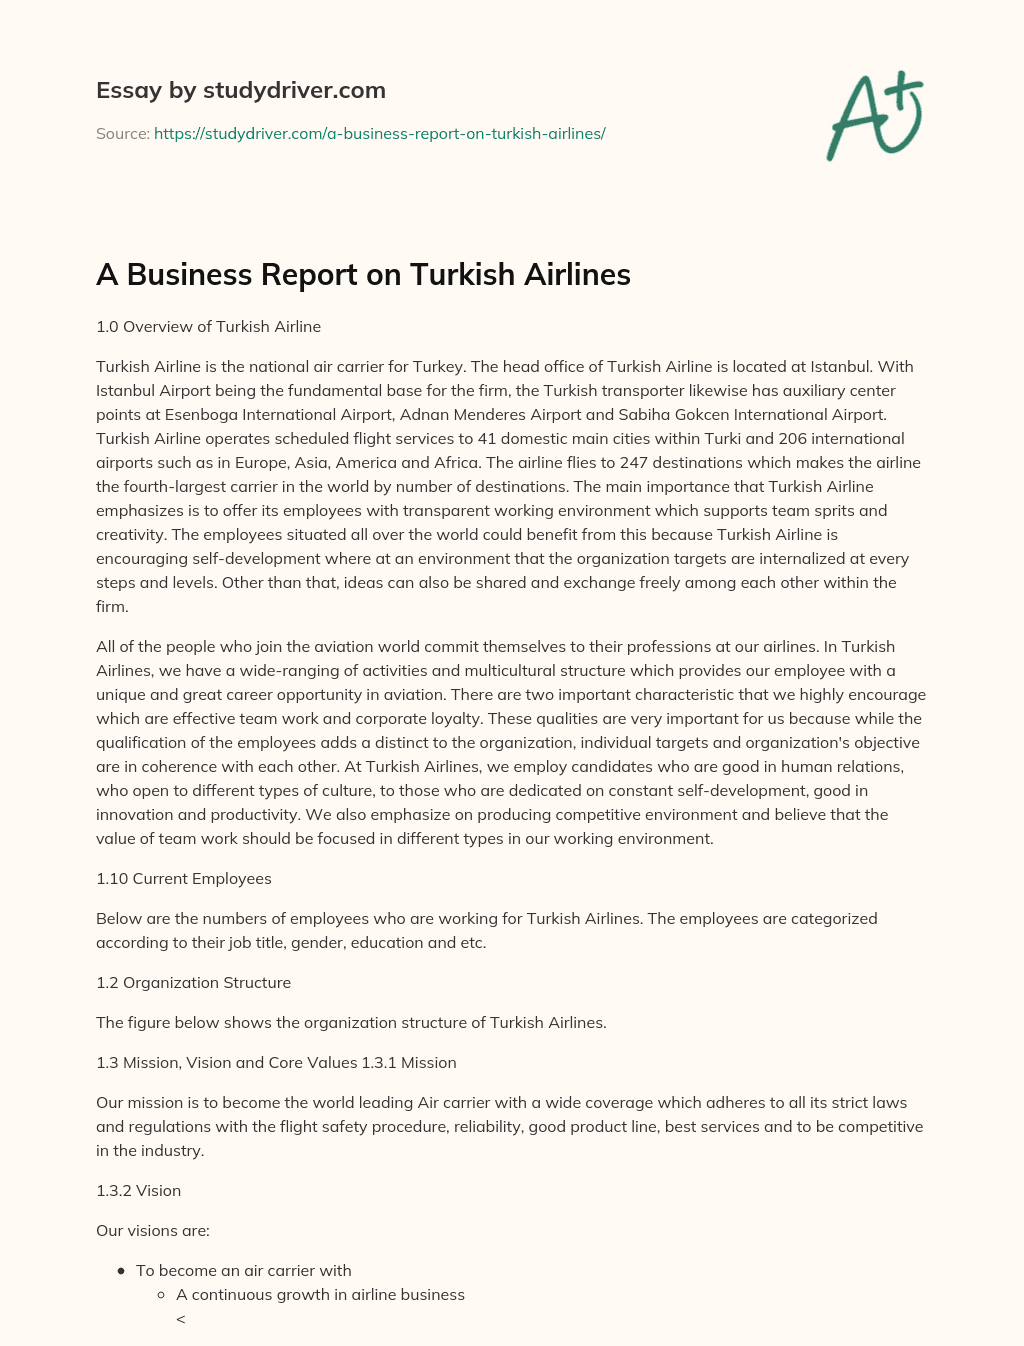 A Business Report on Turkish Airlines essay